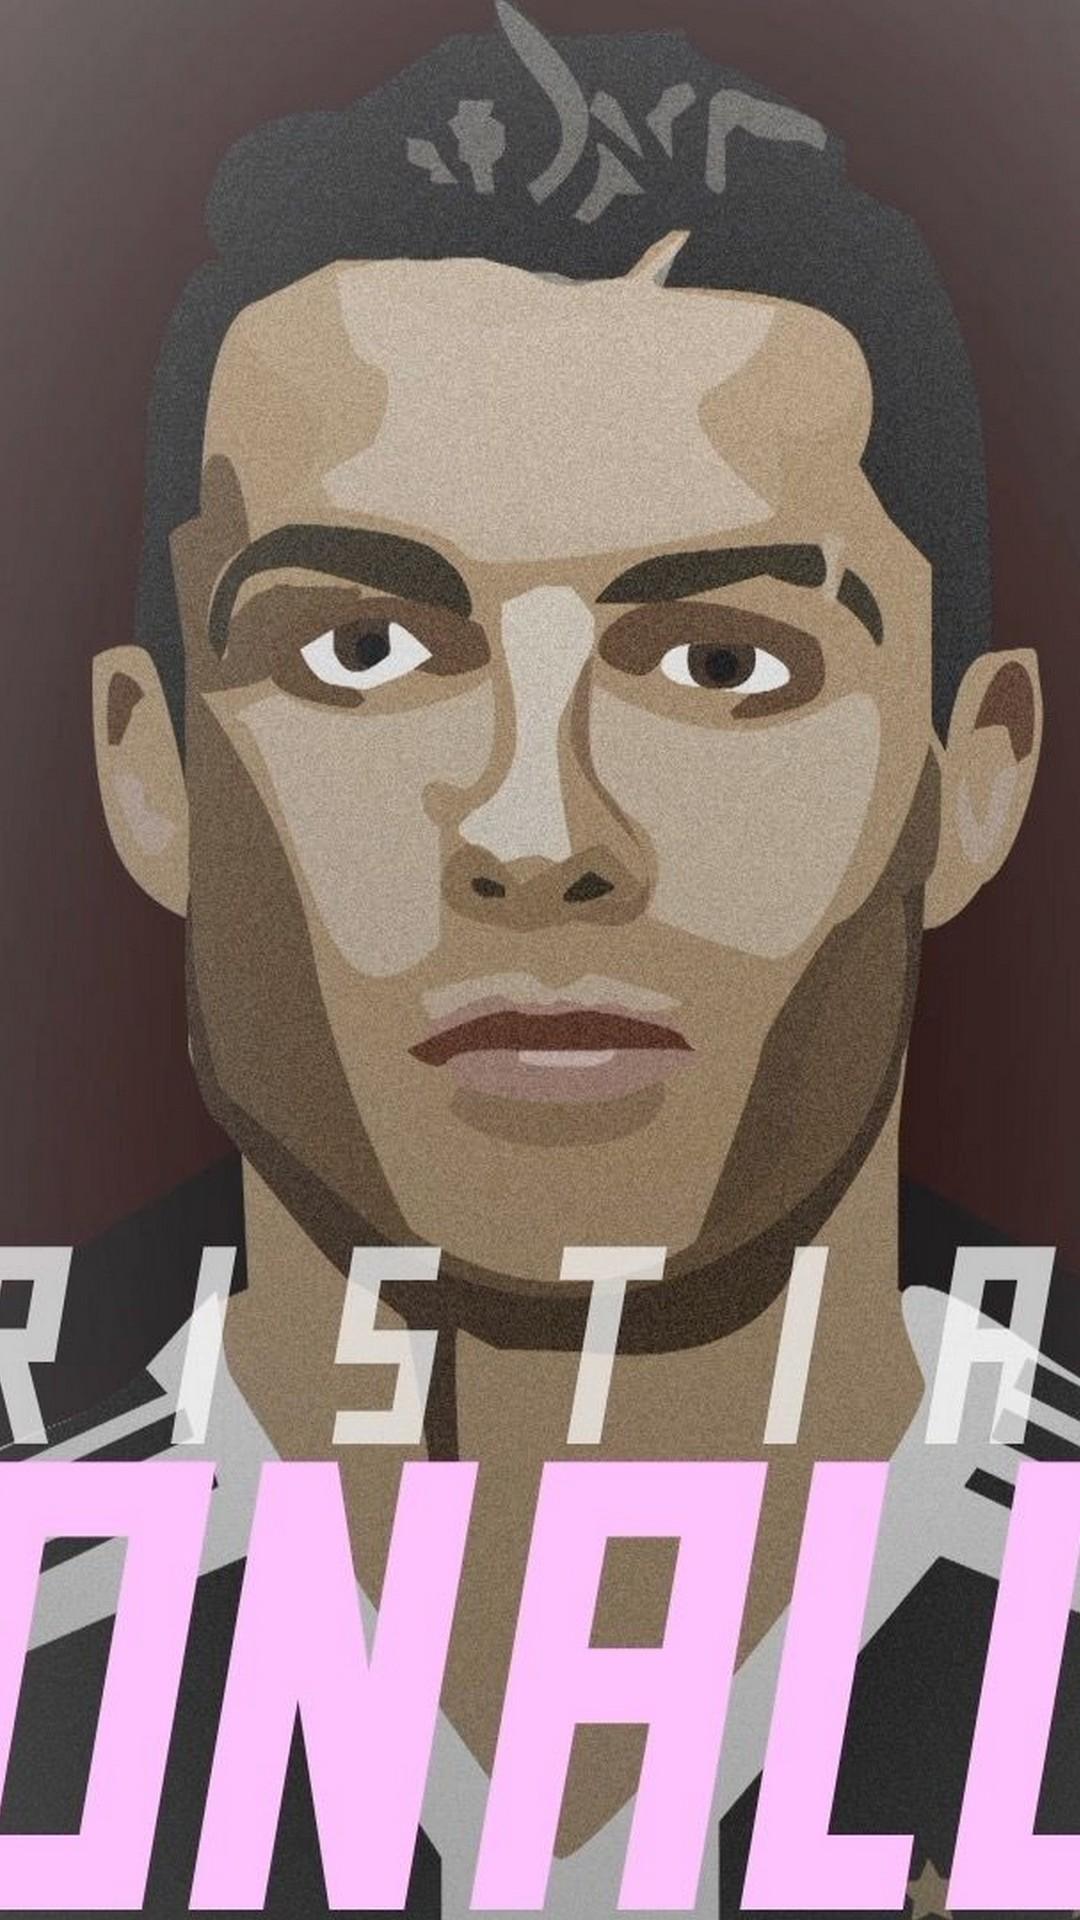 C Ronaldo Juventus Wallpaper For Android Android Wallpaper